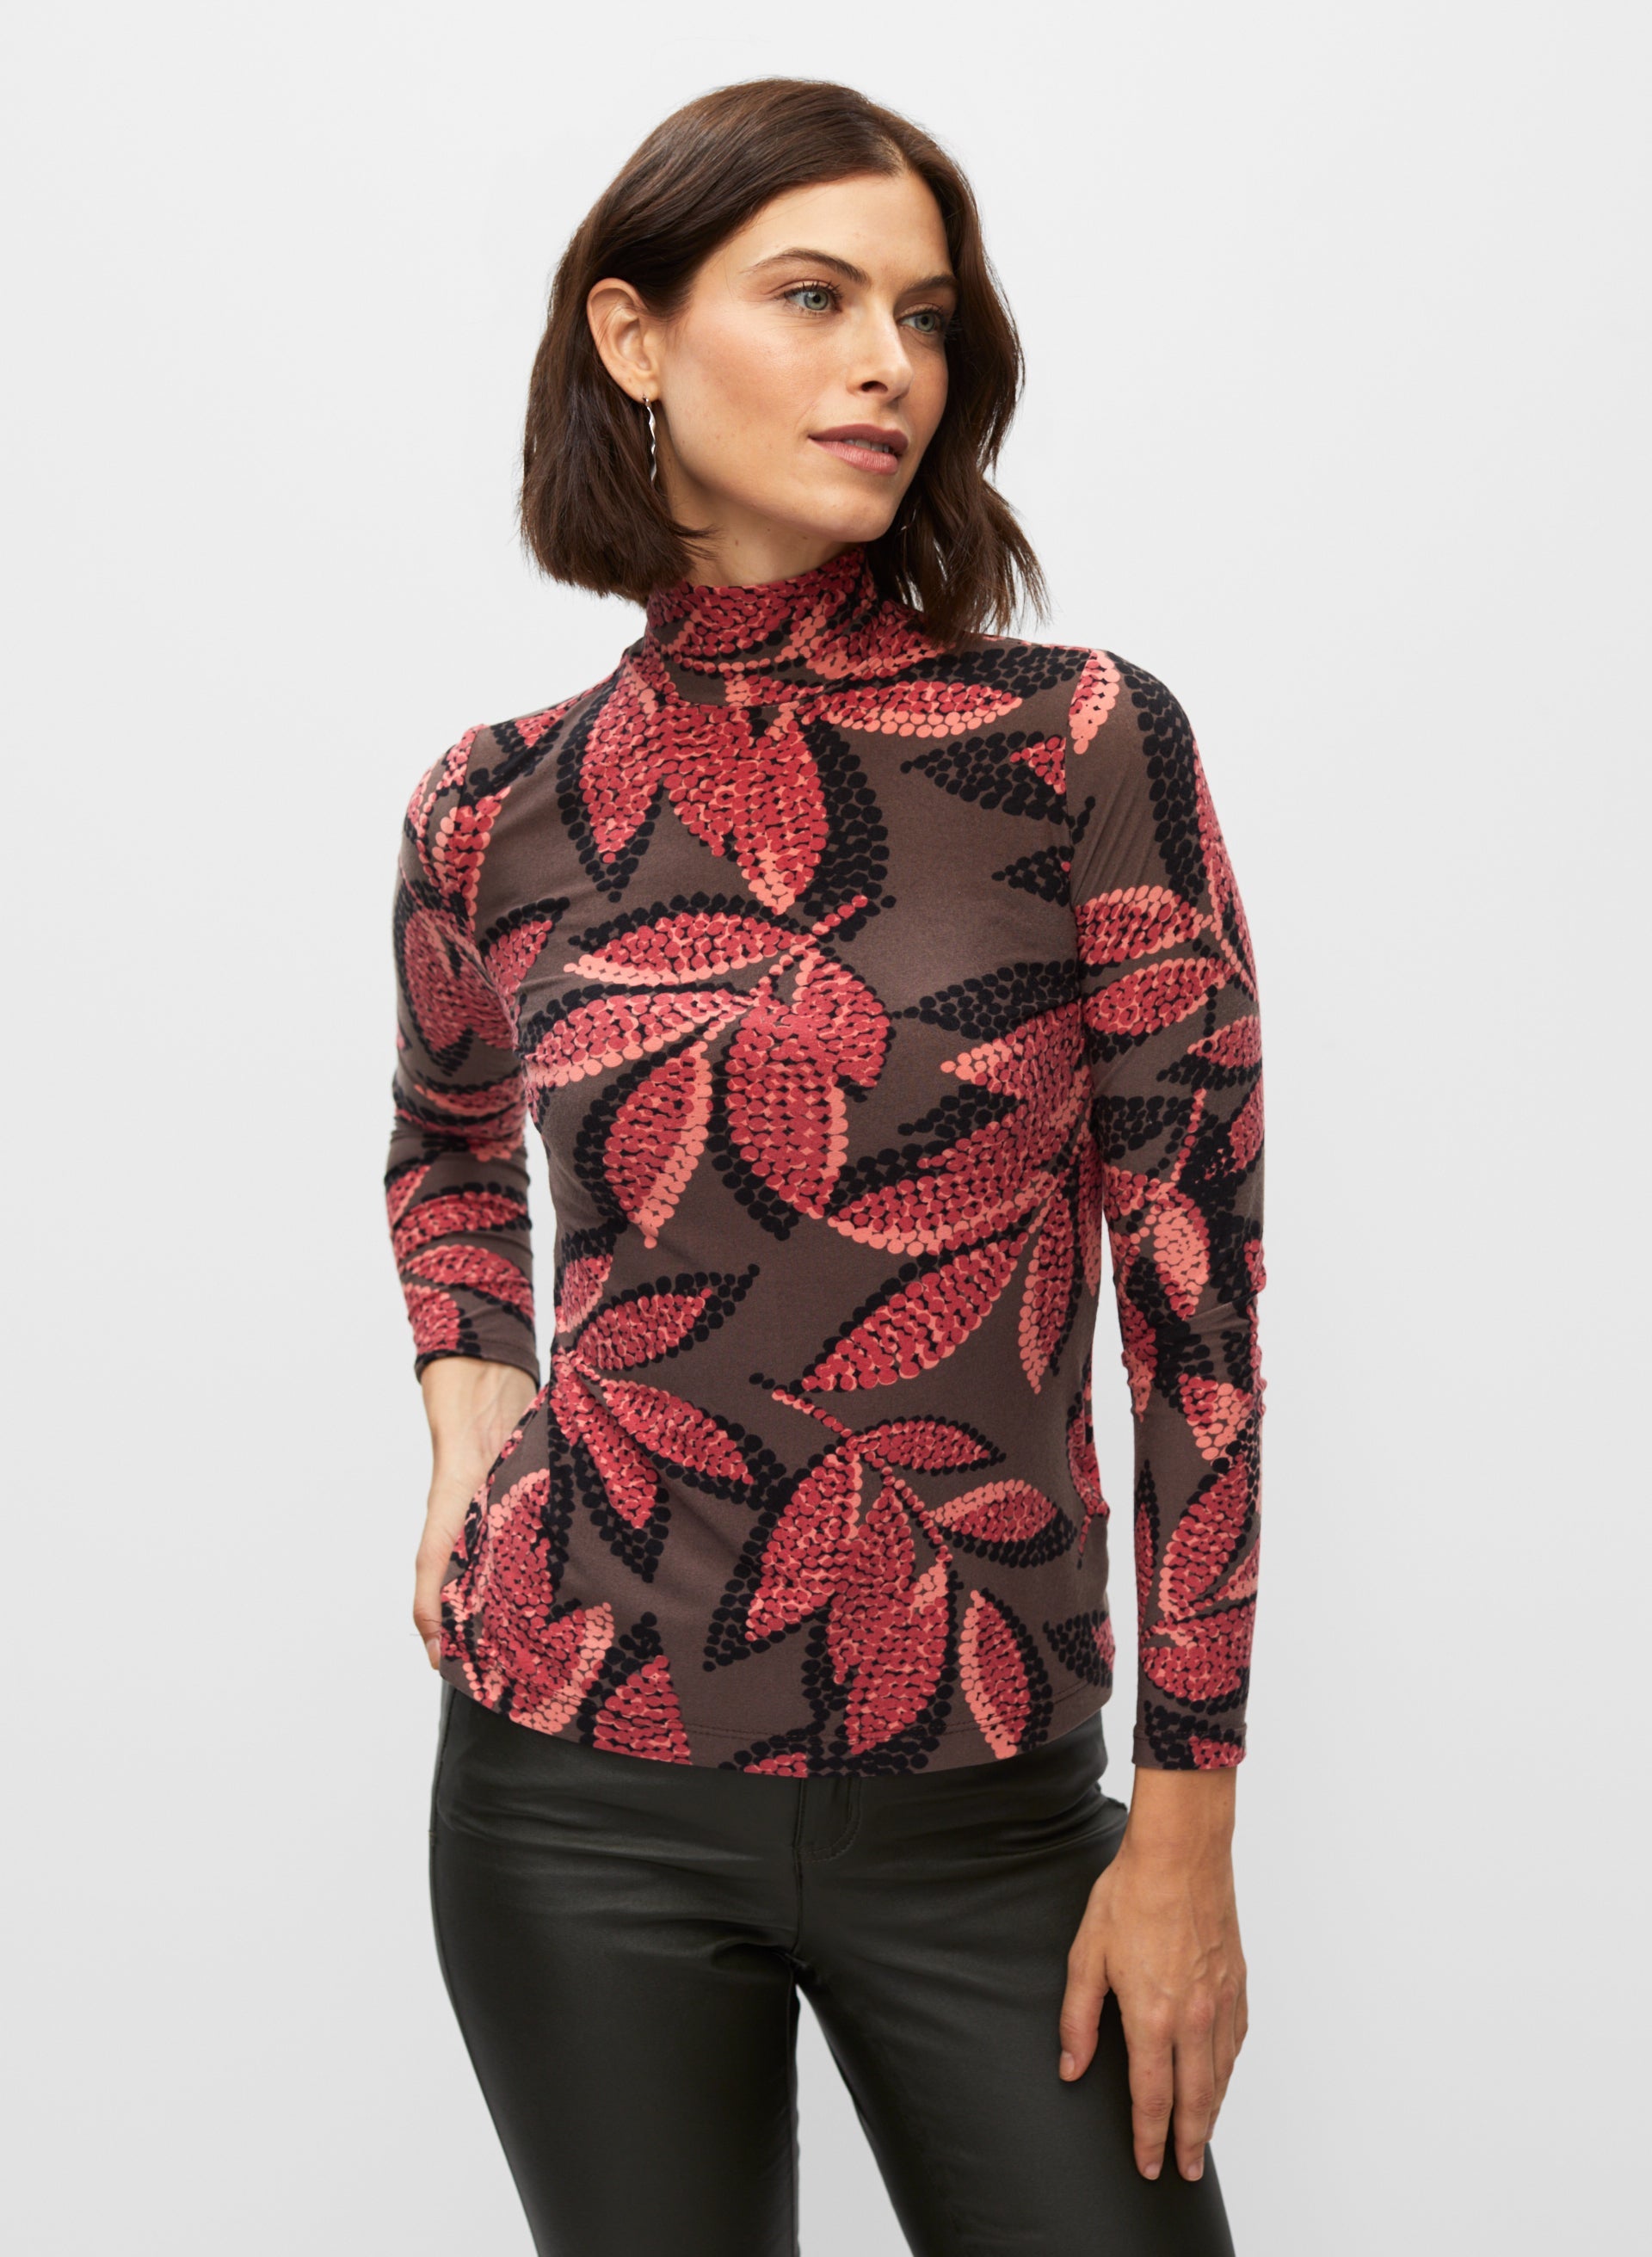 Dotted Leaf Print Top